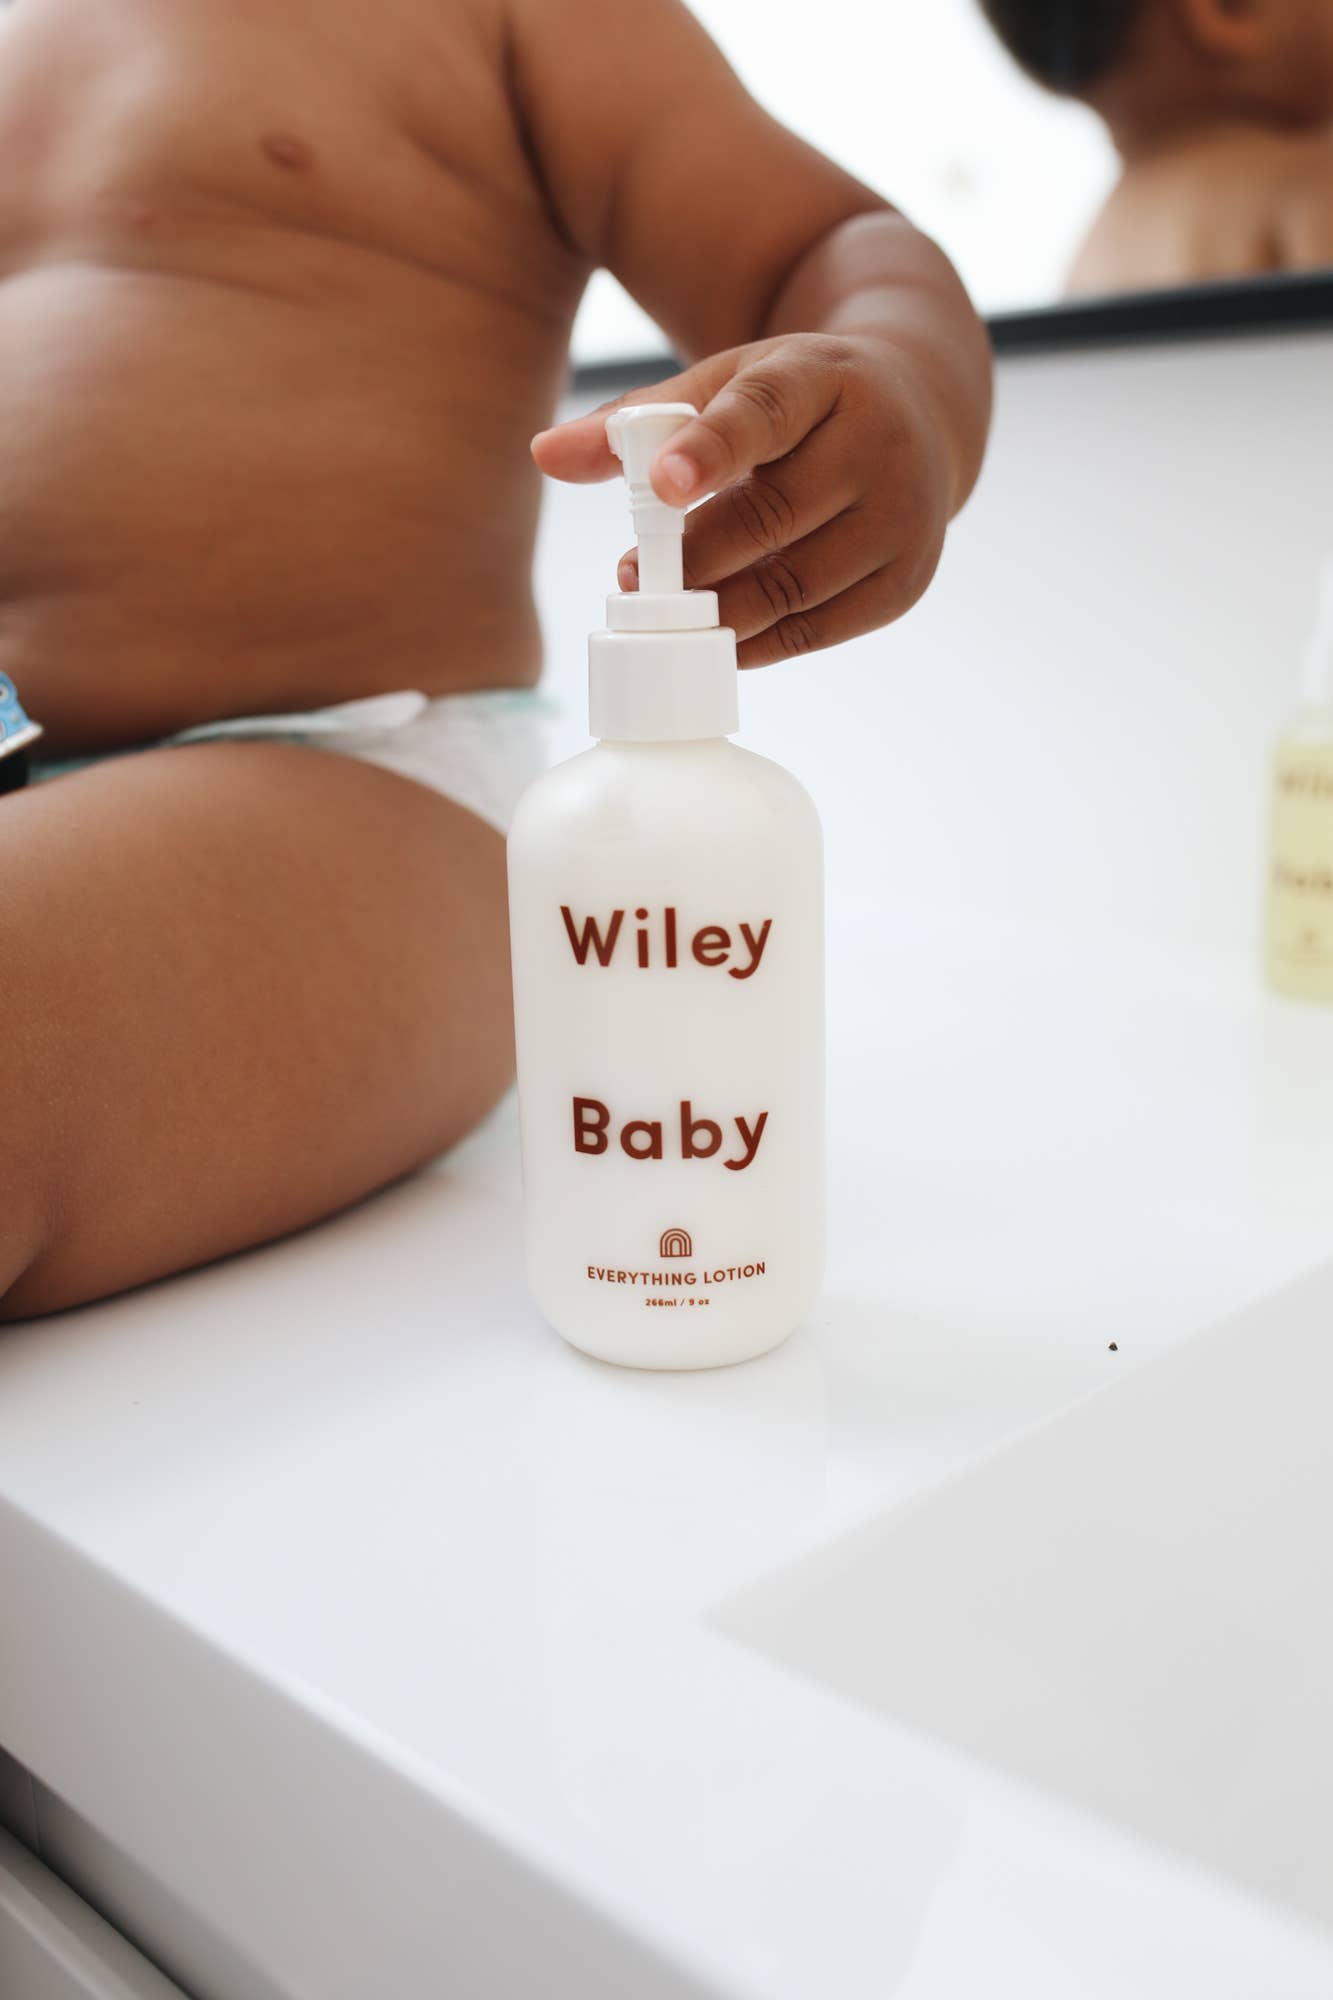 Baby Everything Lotion